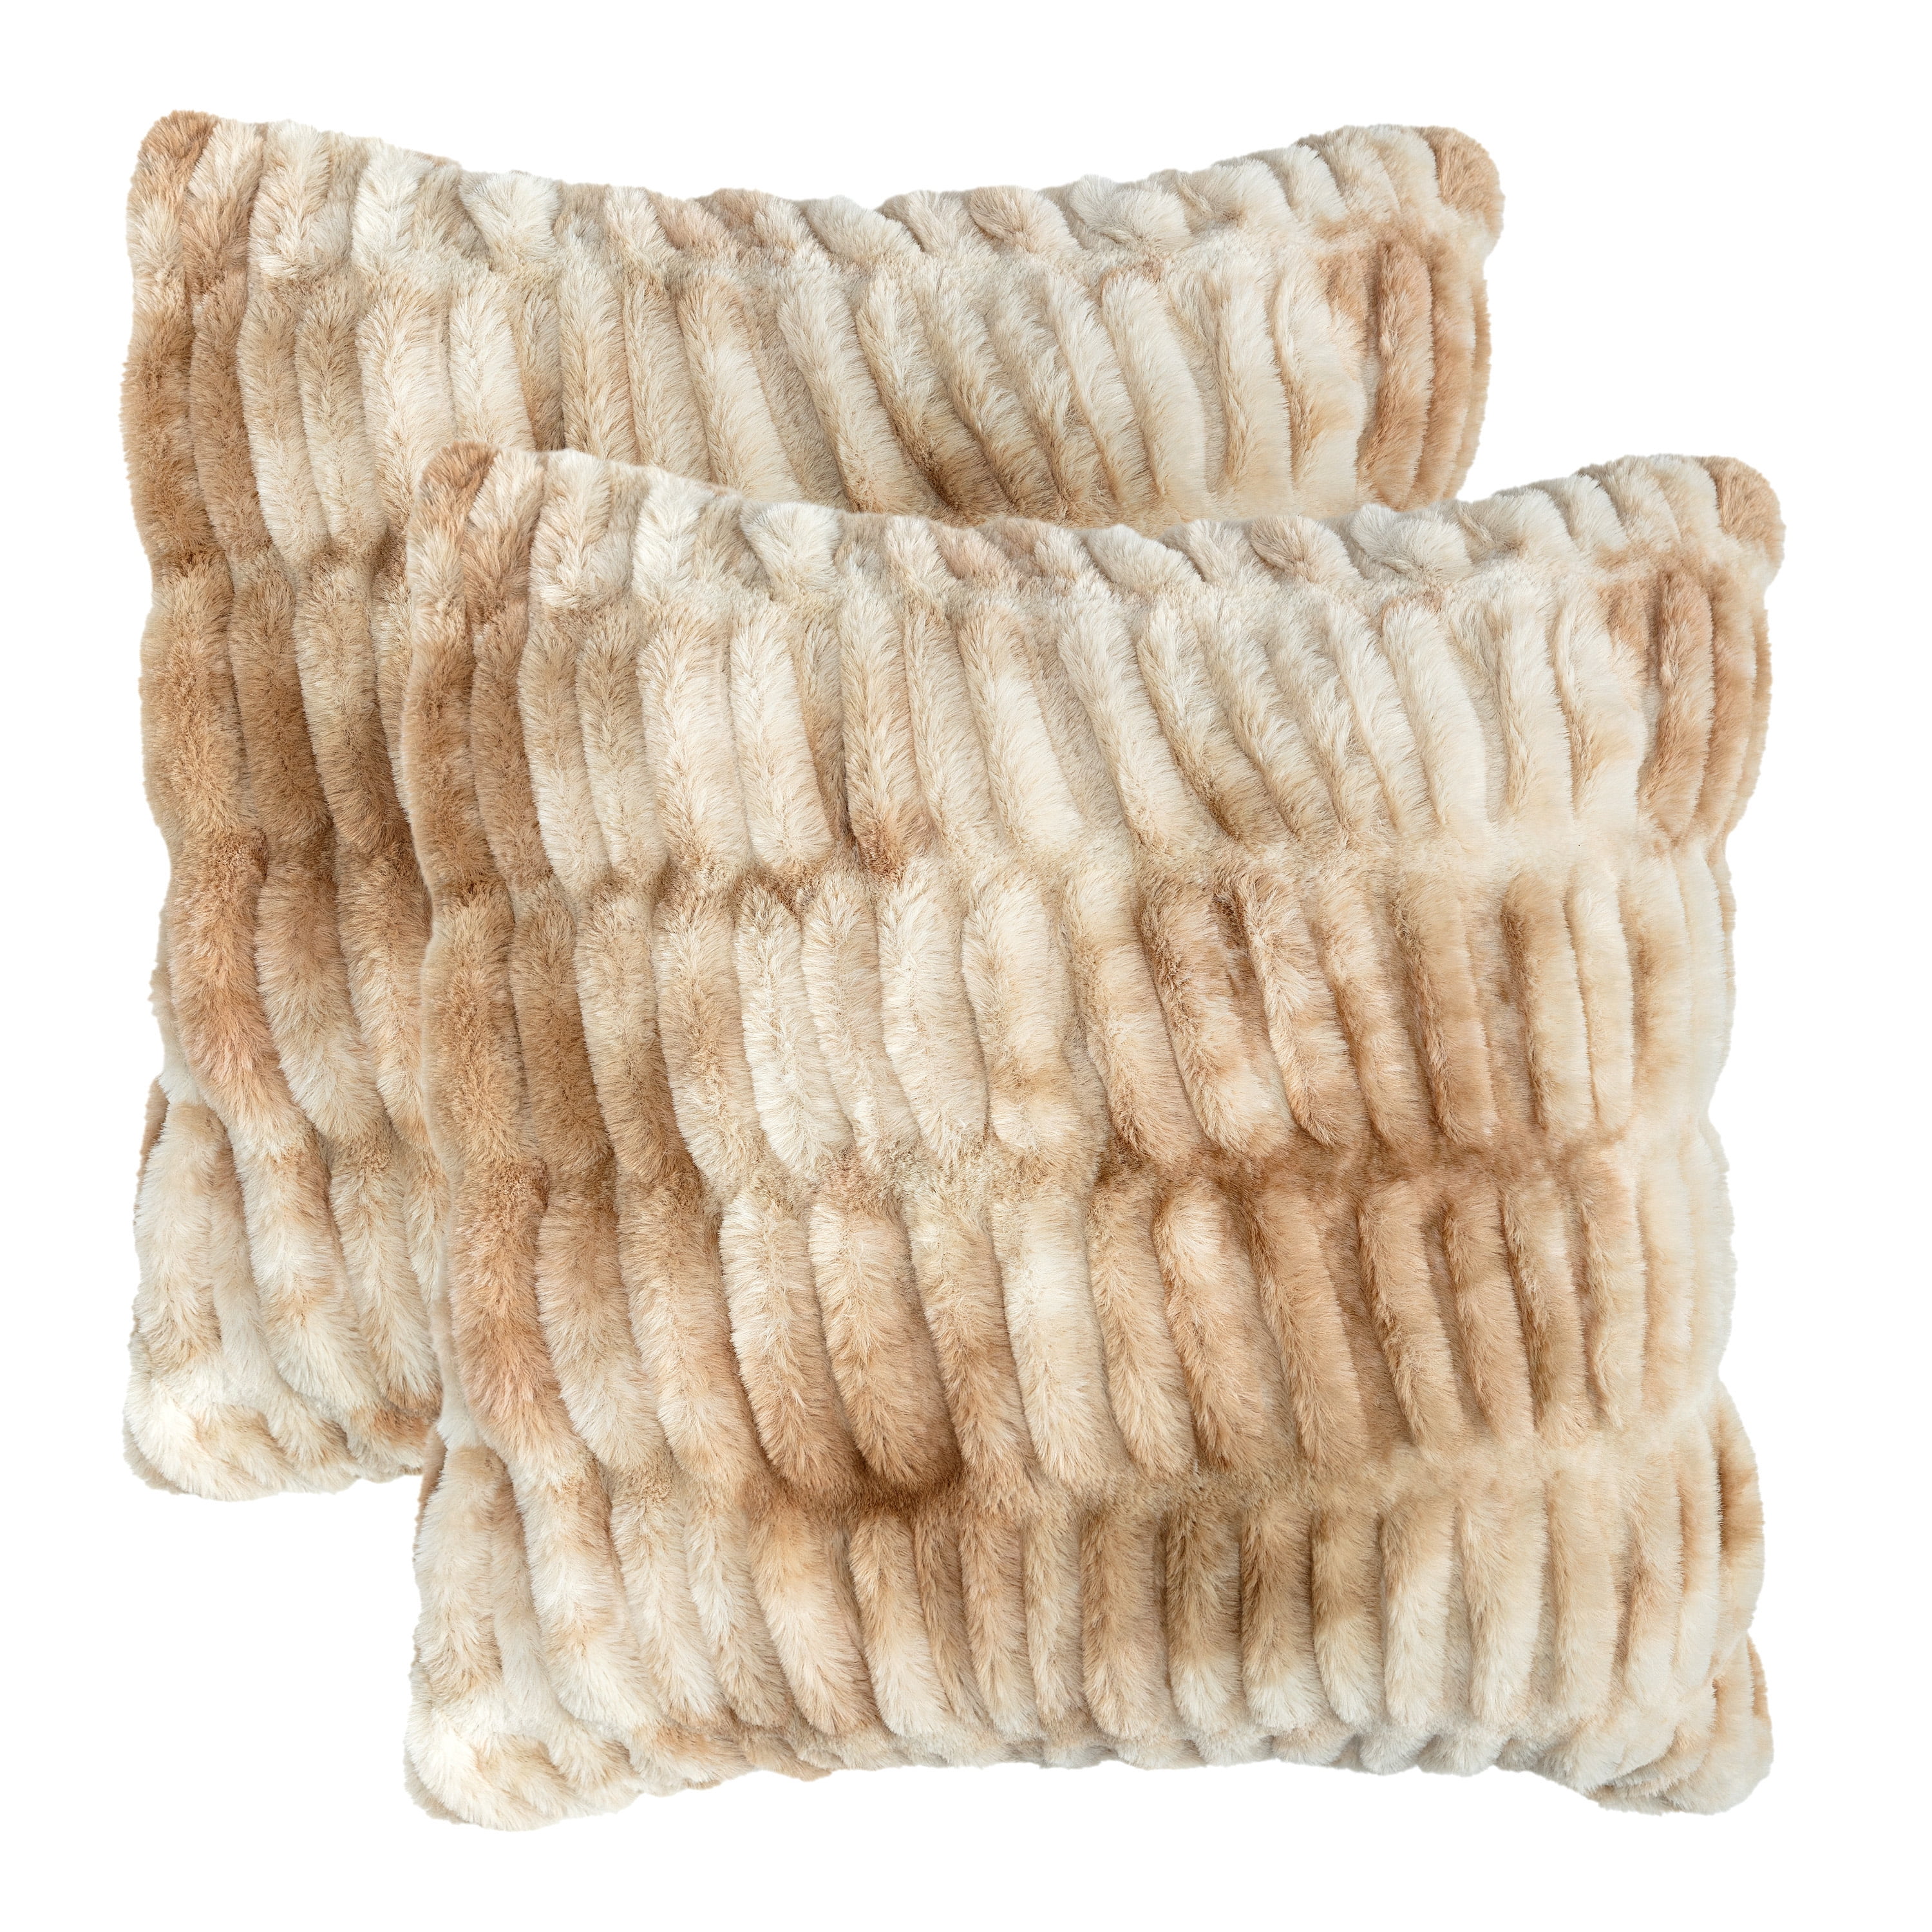 Wavy Fur Pattern 2-Pack Pillow Insert Not Included Chanasya Super Soft Fuzzy Faux Fur Cozy Warm Ivory Fur Throw Pillow Cover Pillow Sham Ivory and Light Orange Pillow Sham 18x18 Inches 